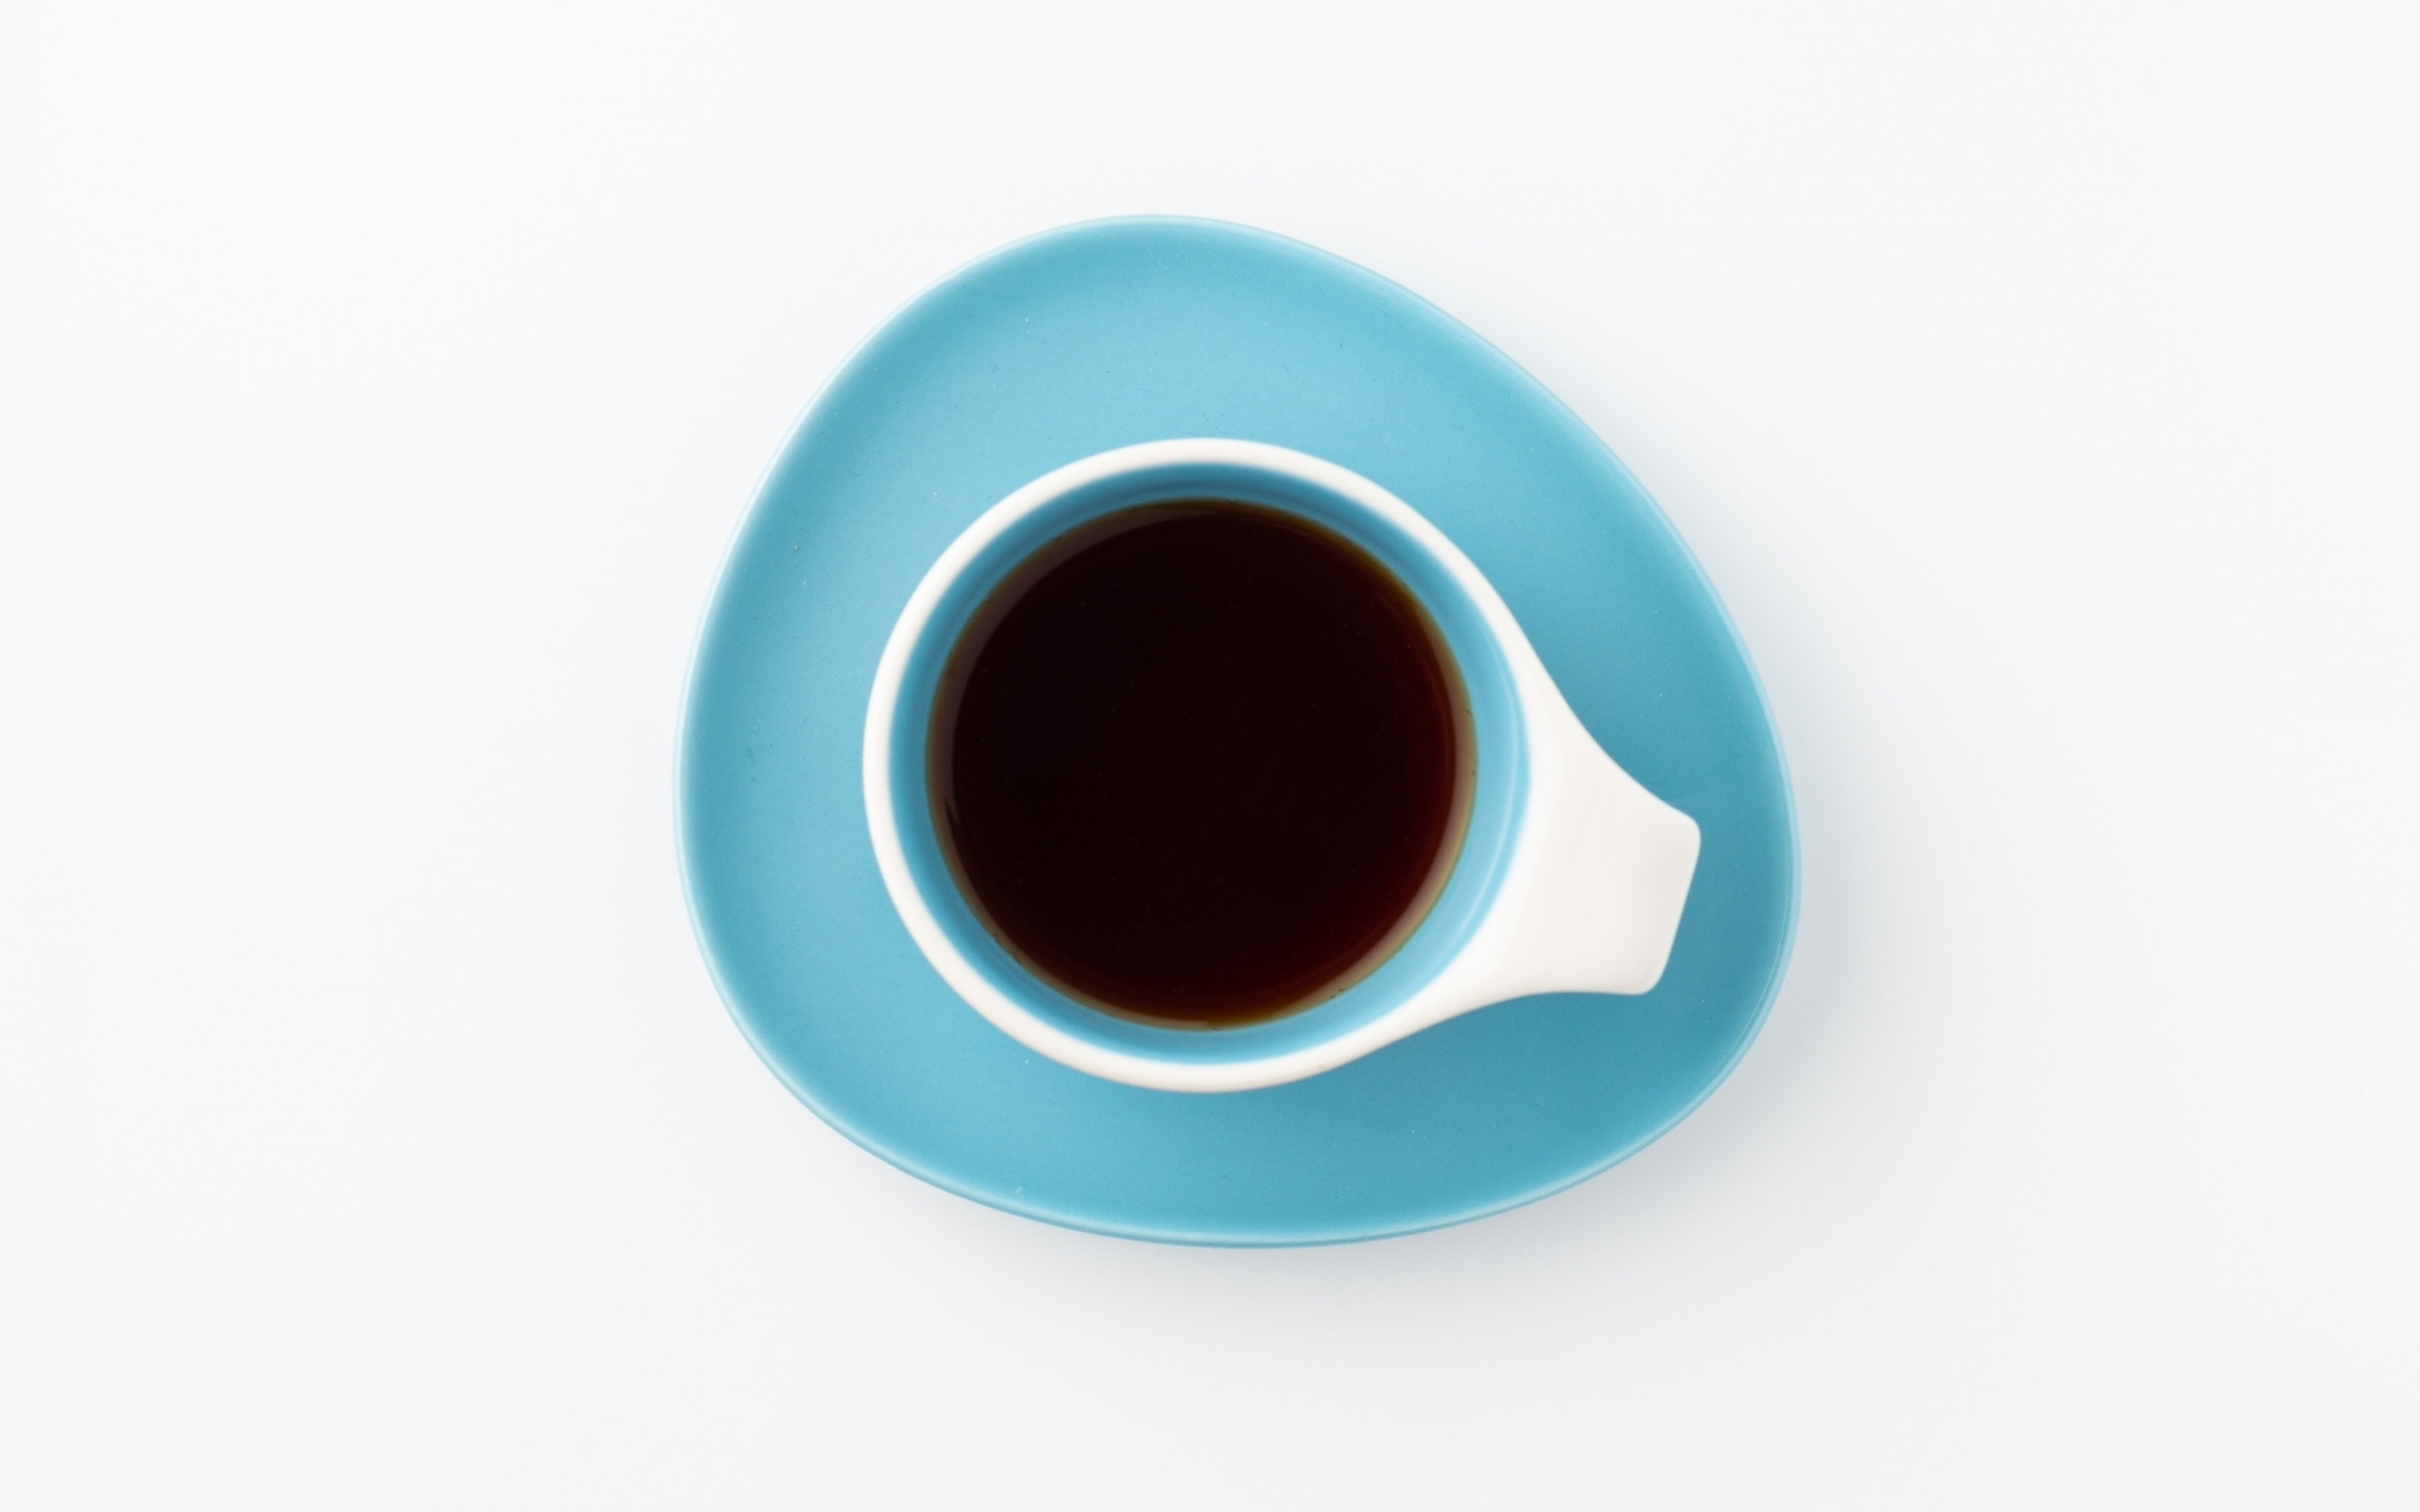 Cup With Coffee, 4k, Minimal, Good Morning, White Backgrounds, - Coffee Cup - HD Wallpaper 